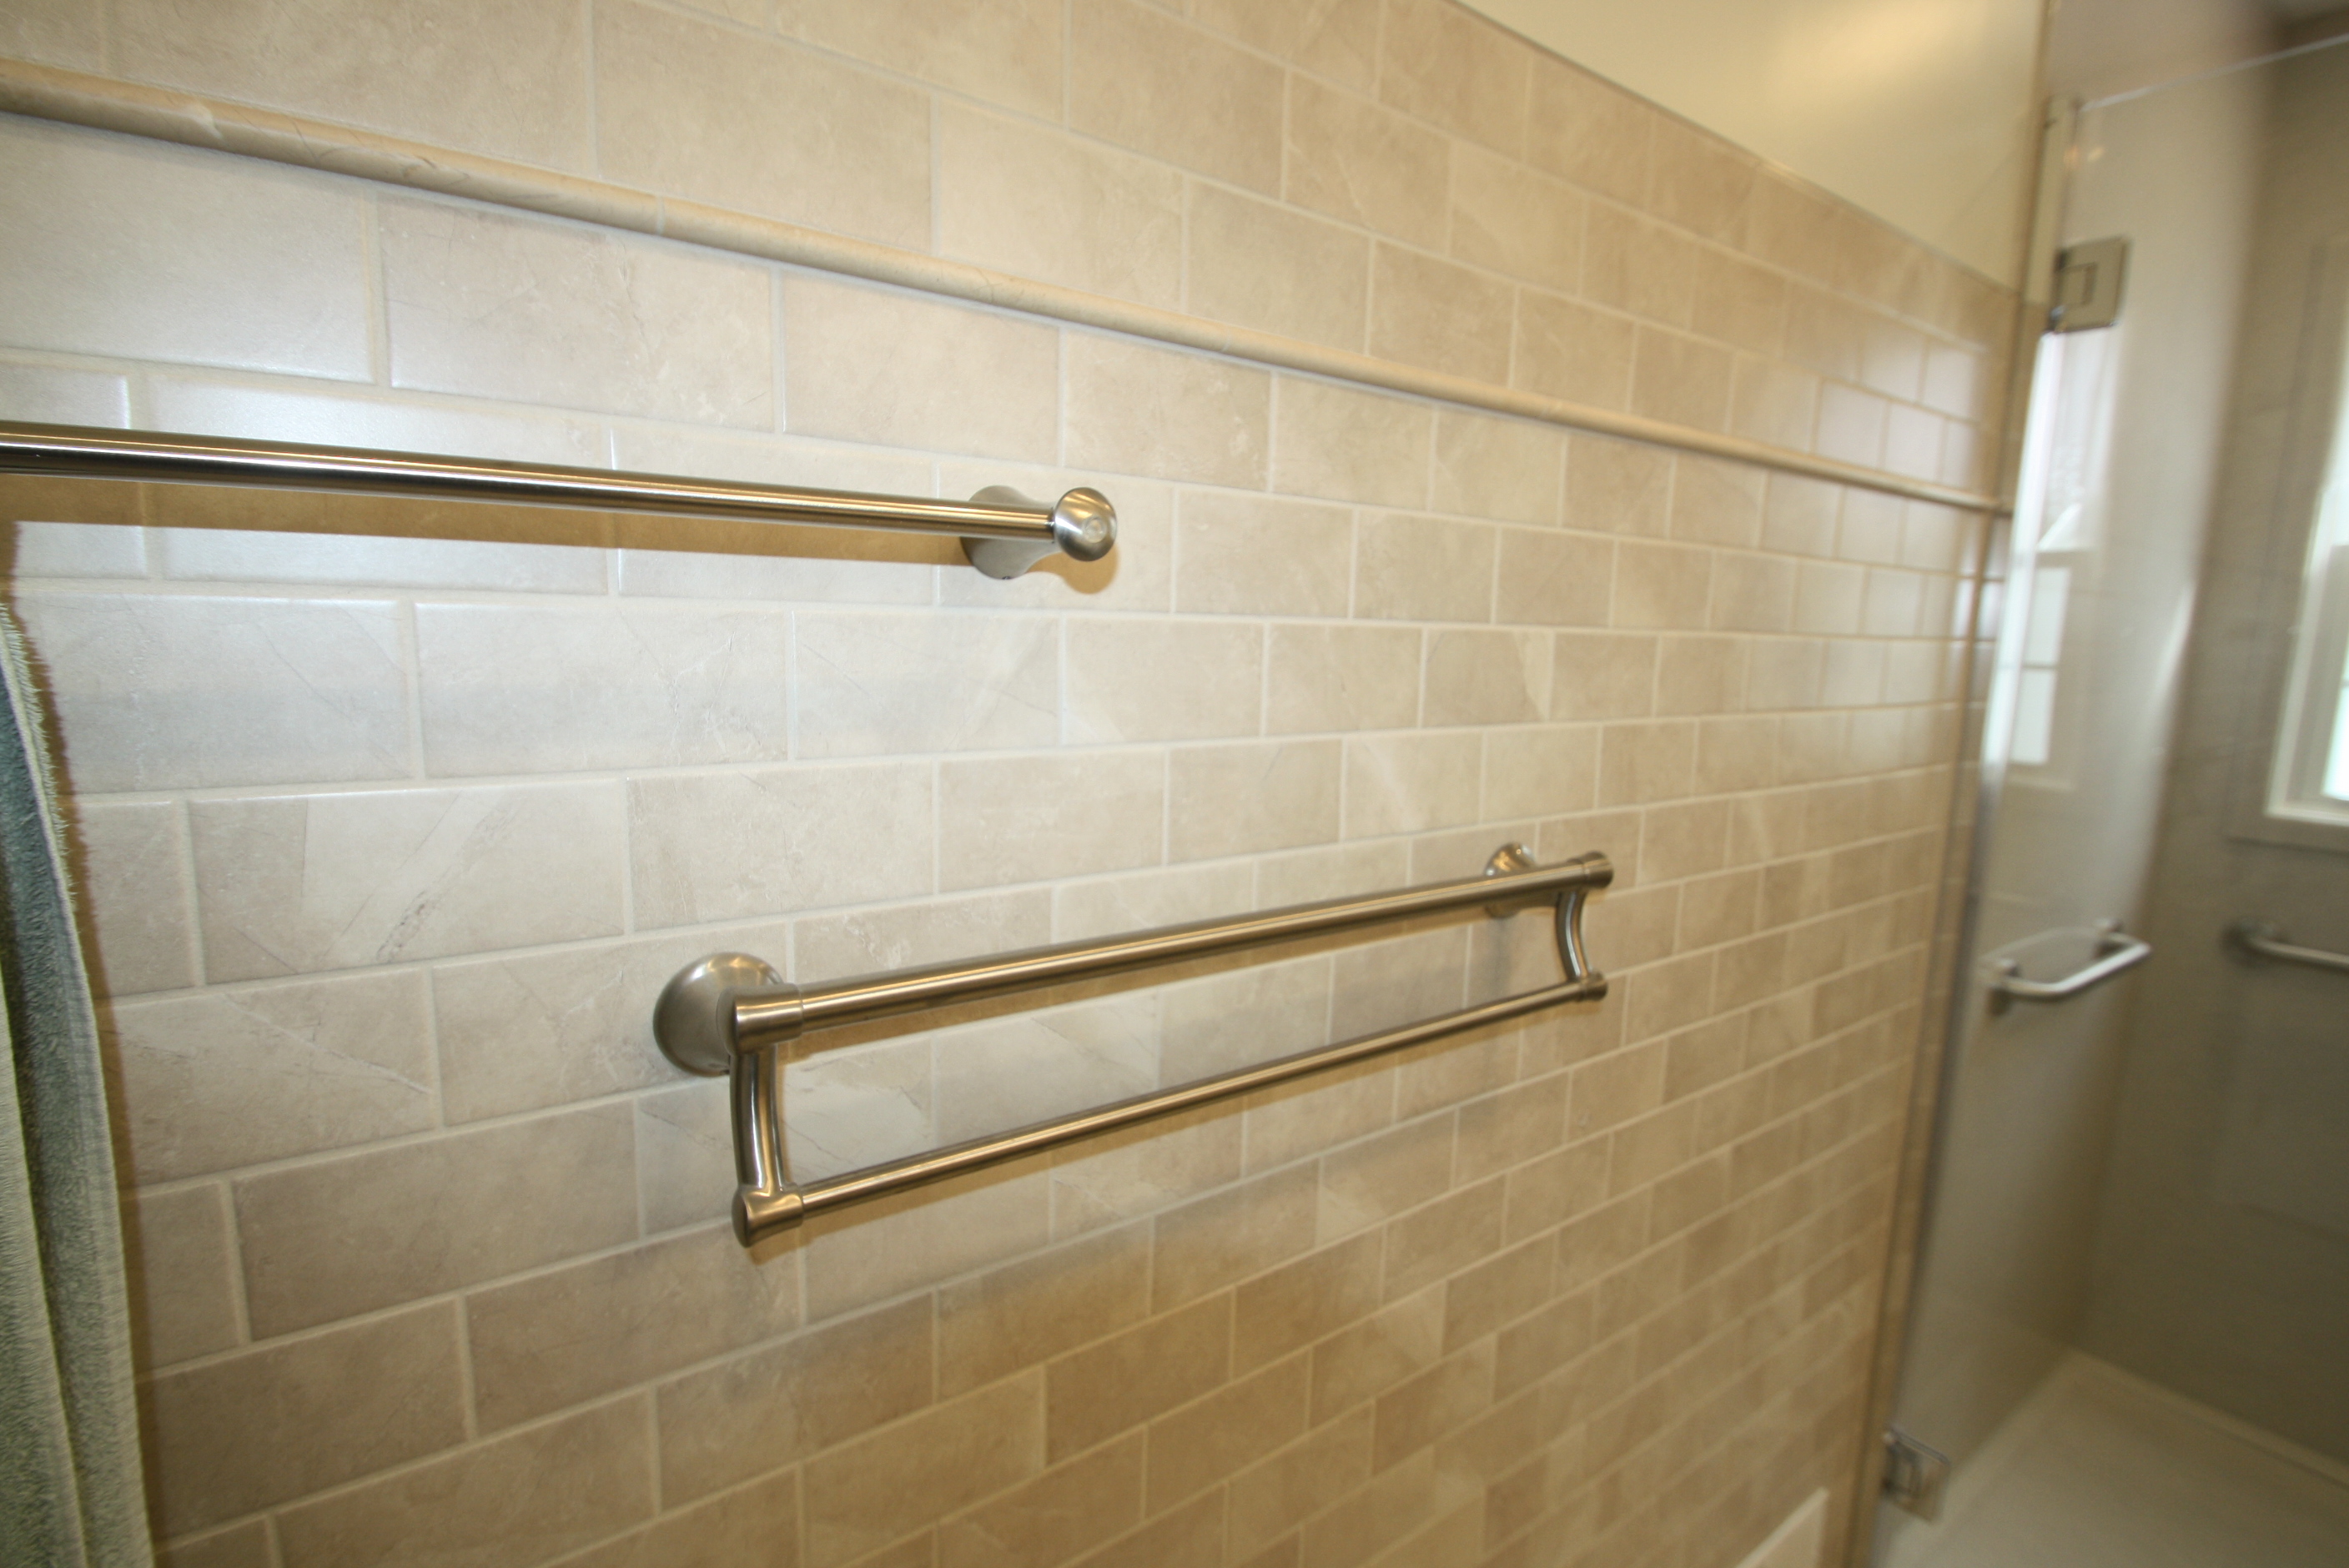 shower handles and railings